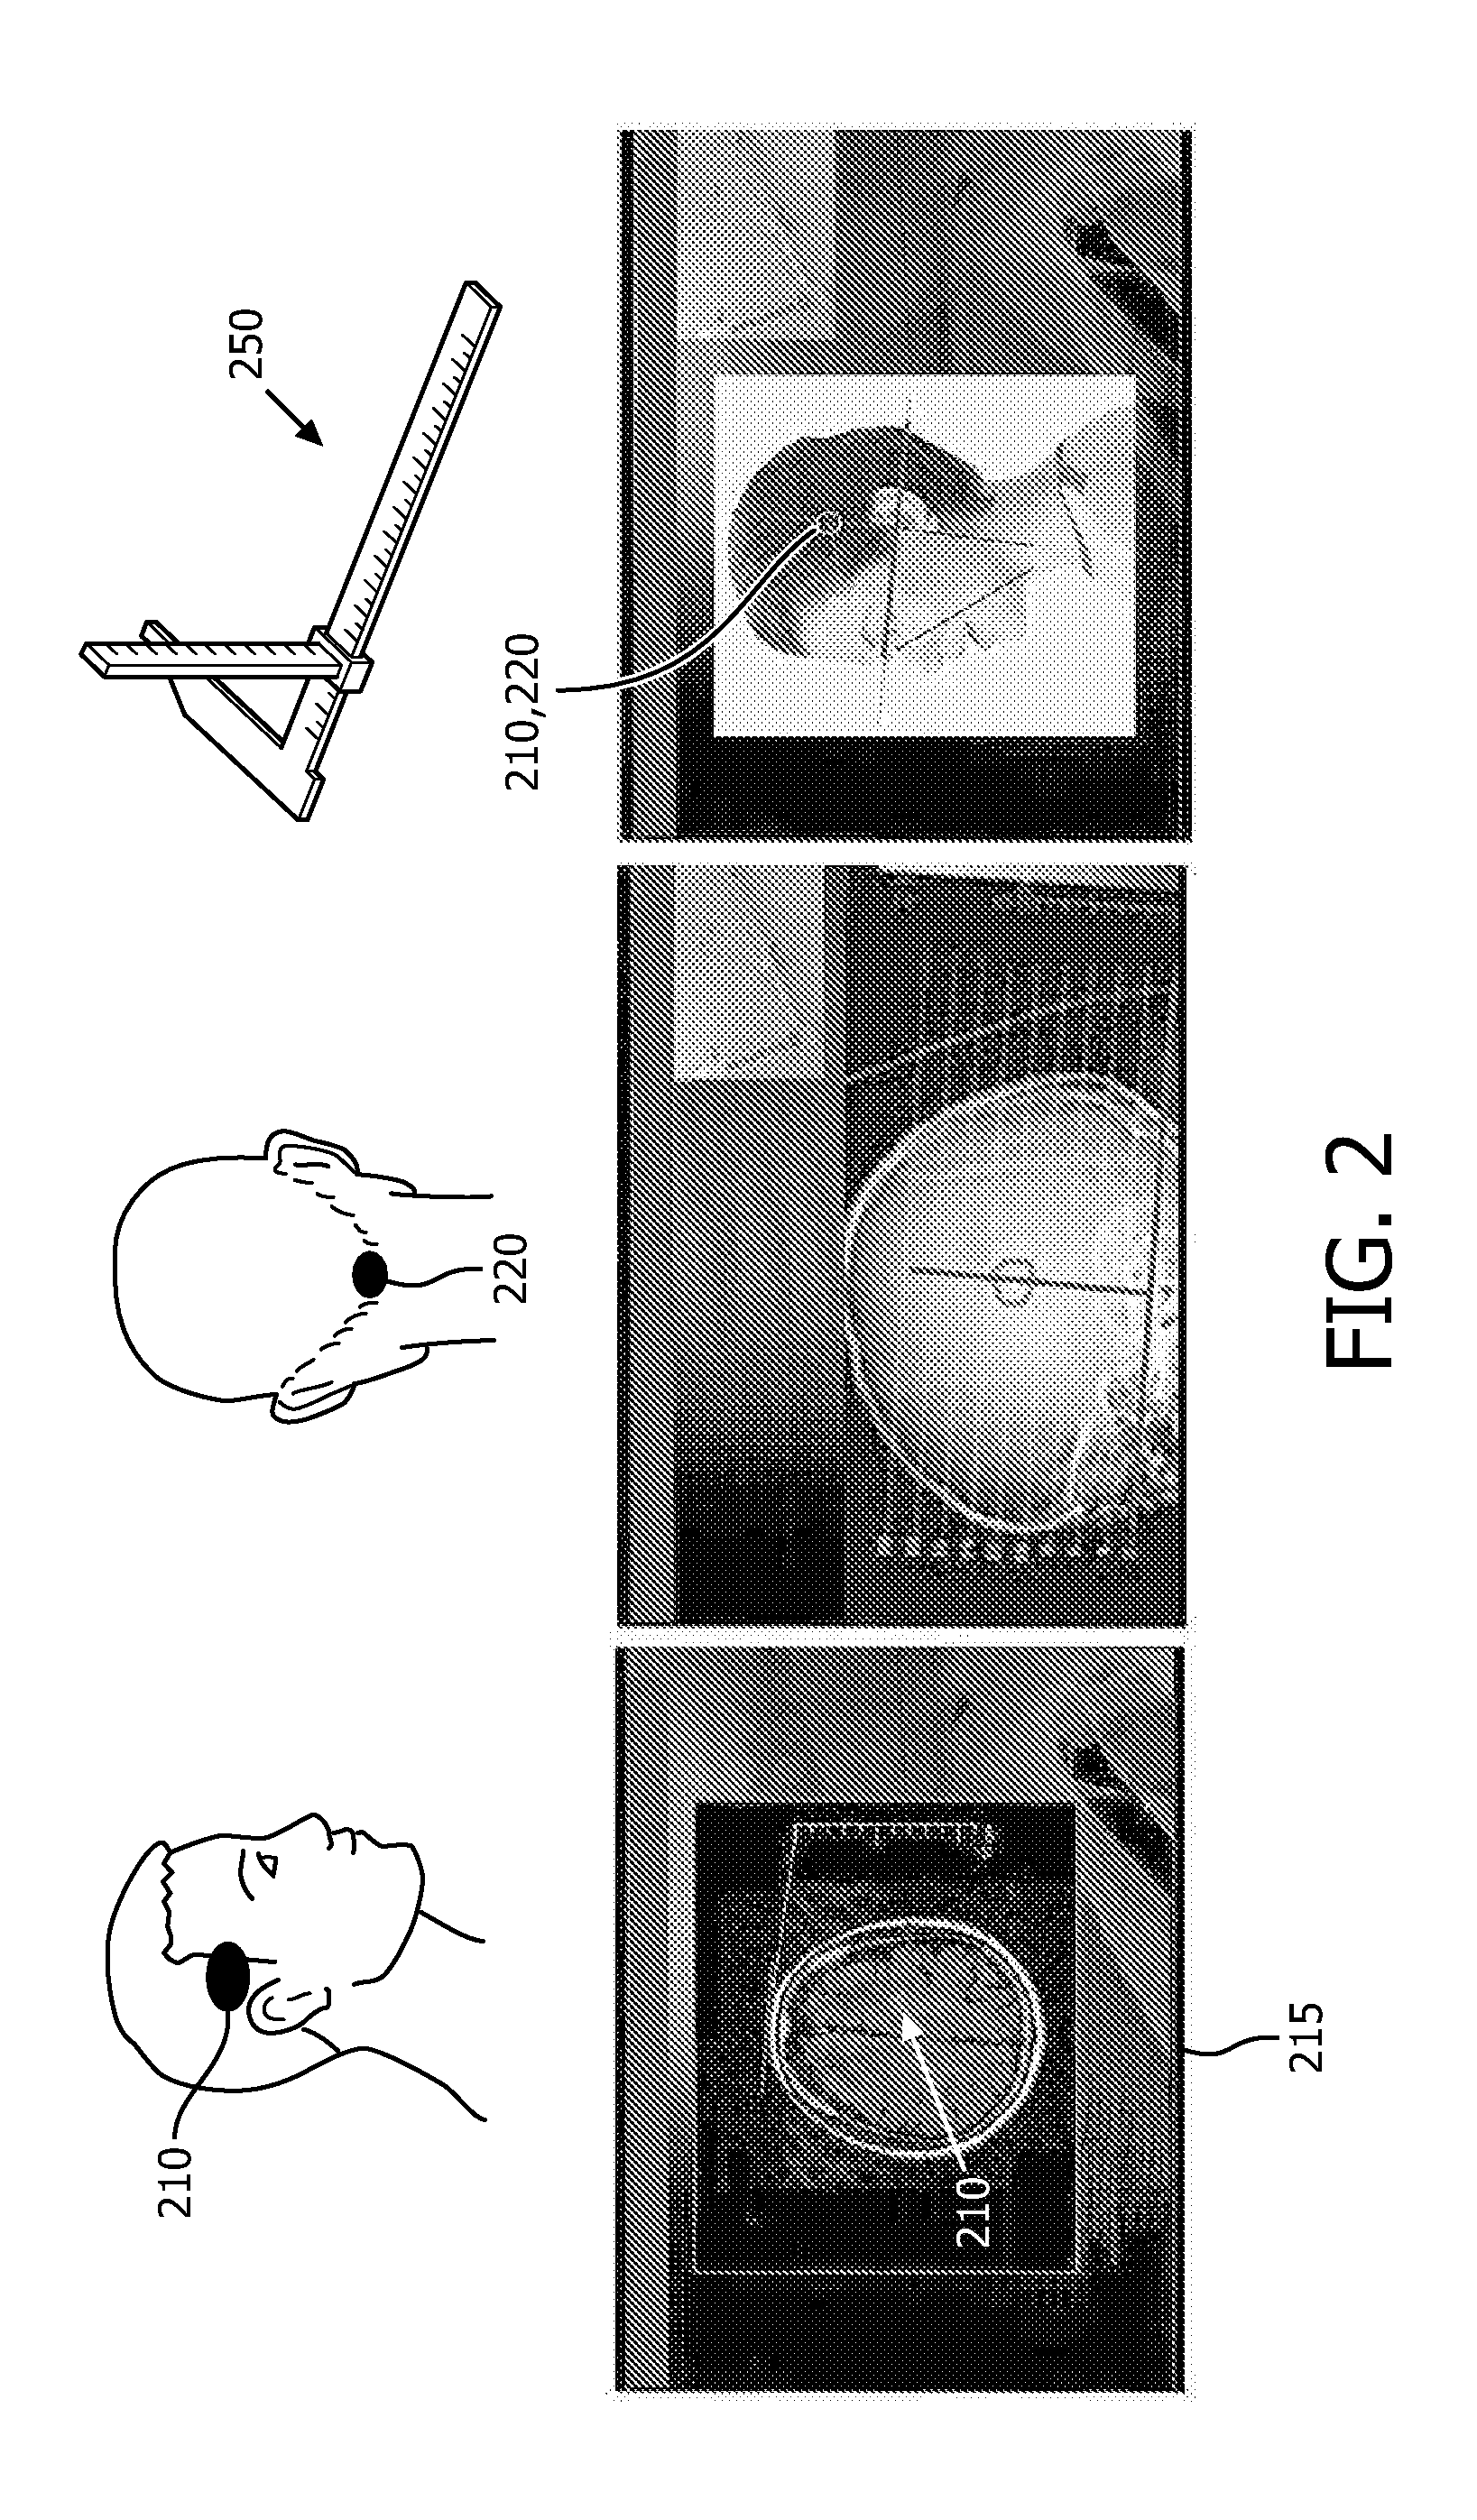 System and method for ultrasound and computed tomography image registration for sonothrombolysis treatment